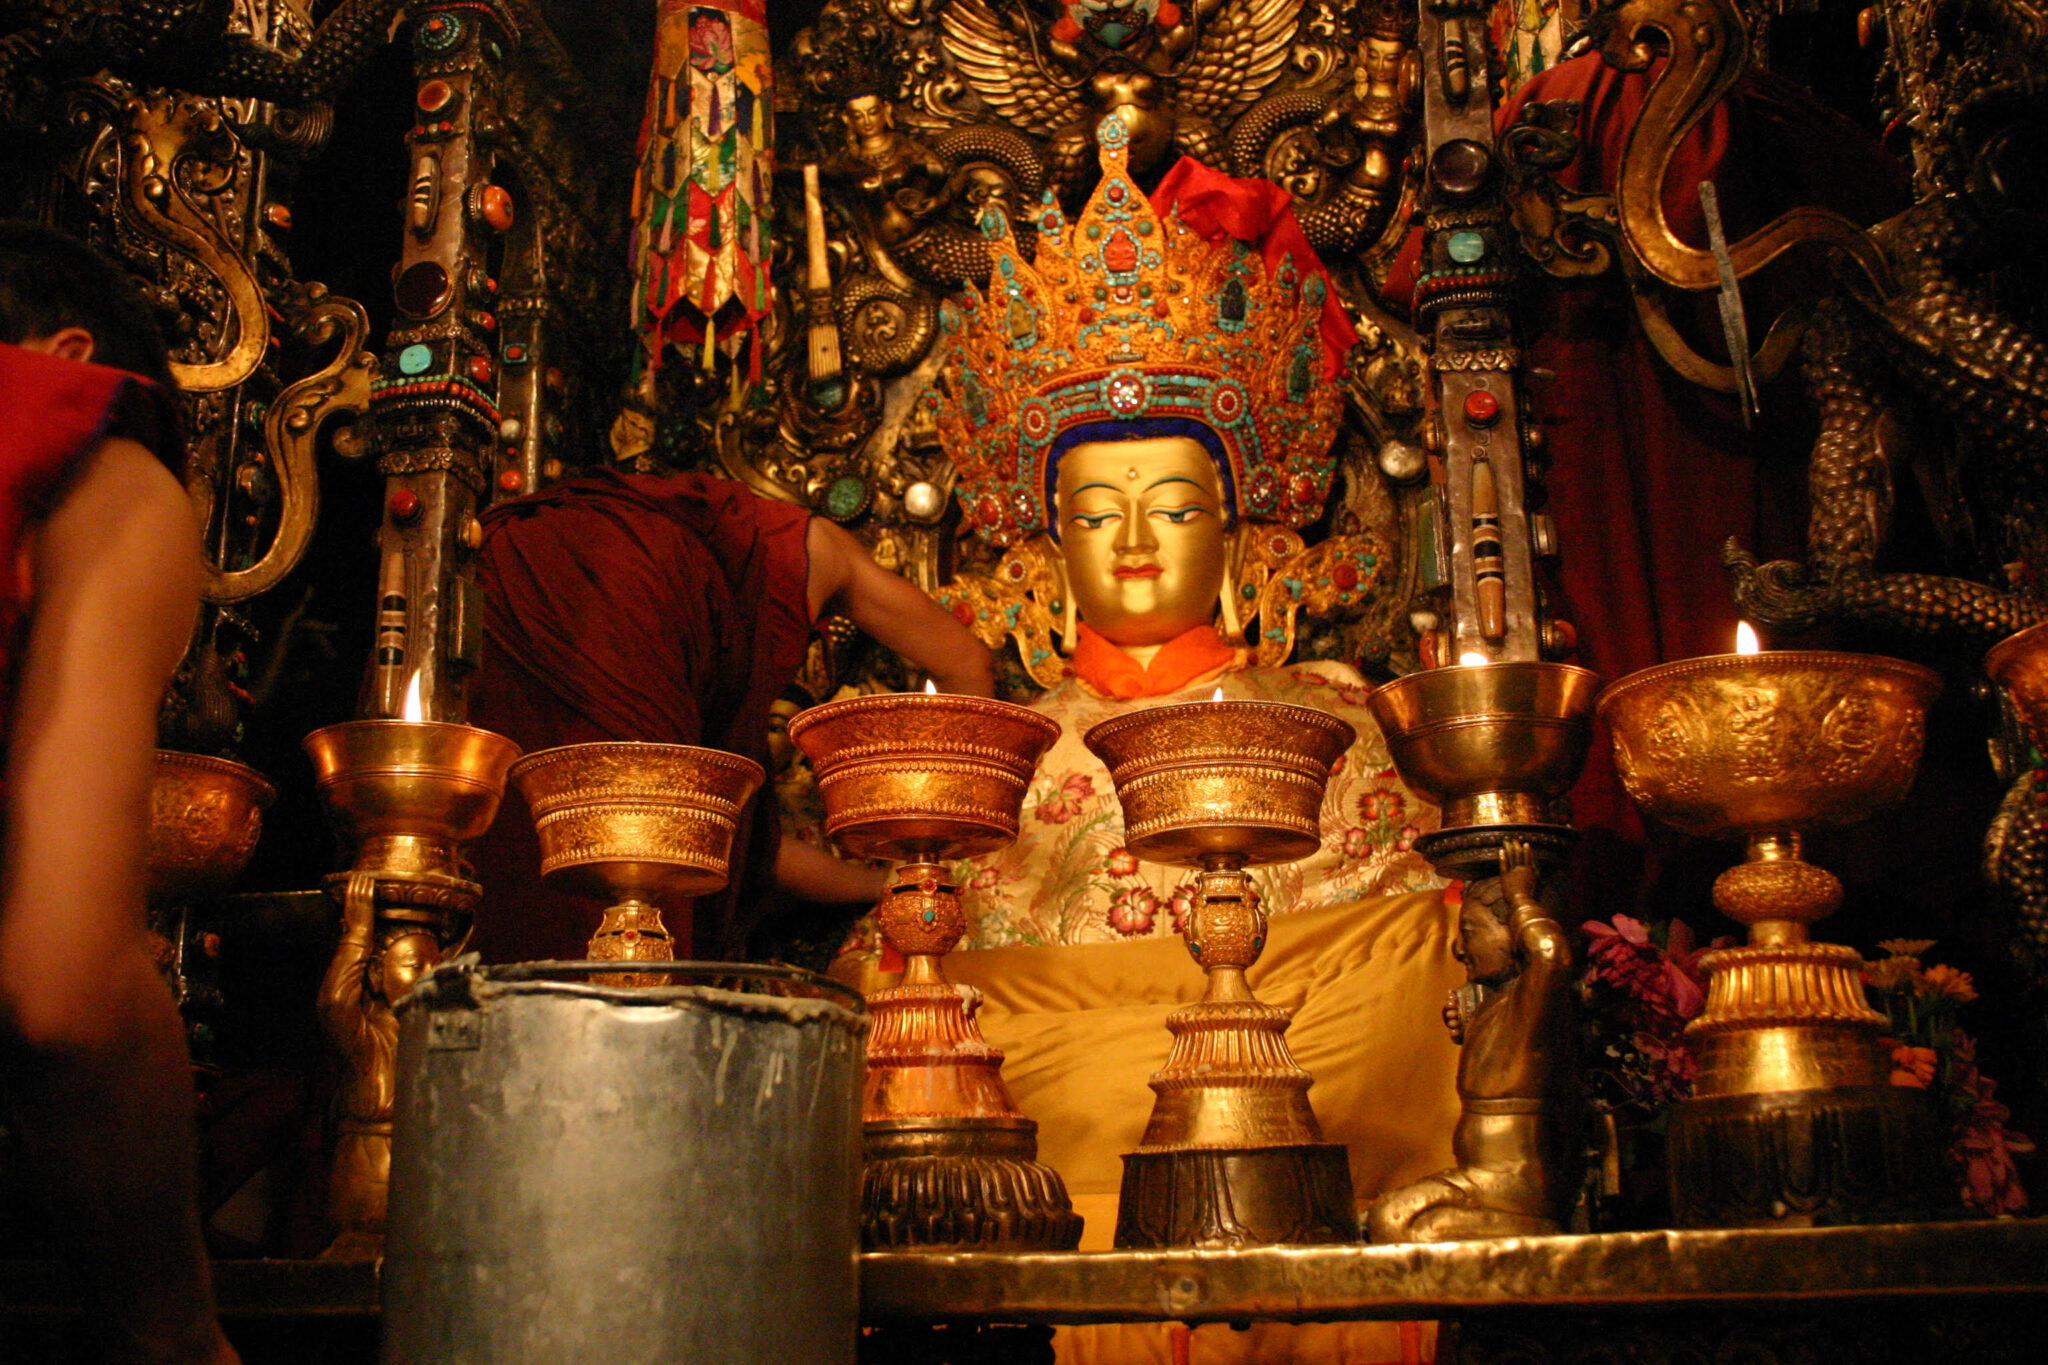 Monks approach golden statue of Buddha from the left; scene is viewed through row of butter lamps